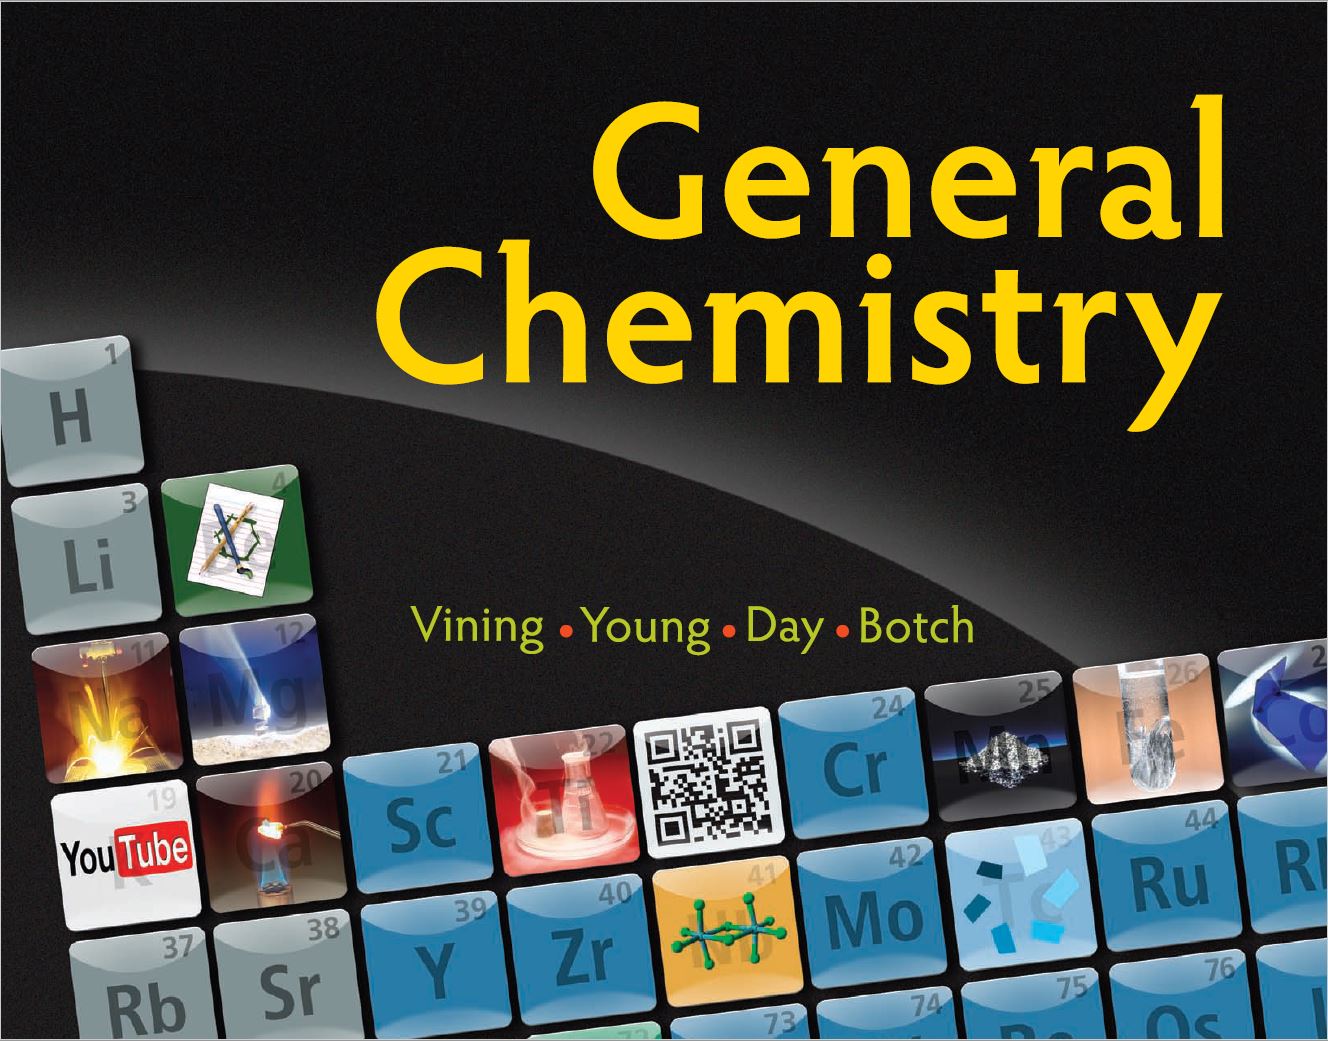 General Chemistry by Vining, Young, Day and Botch